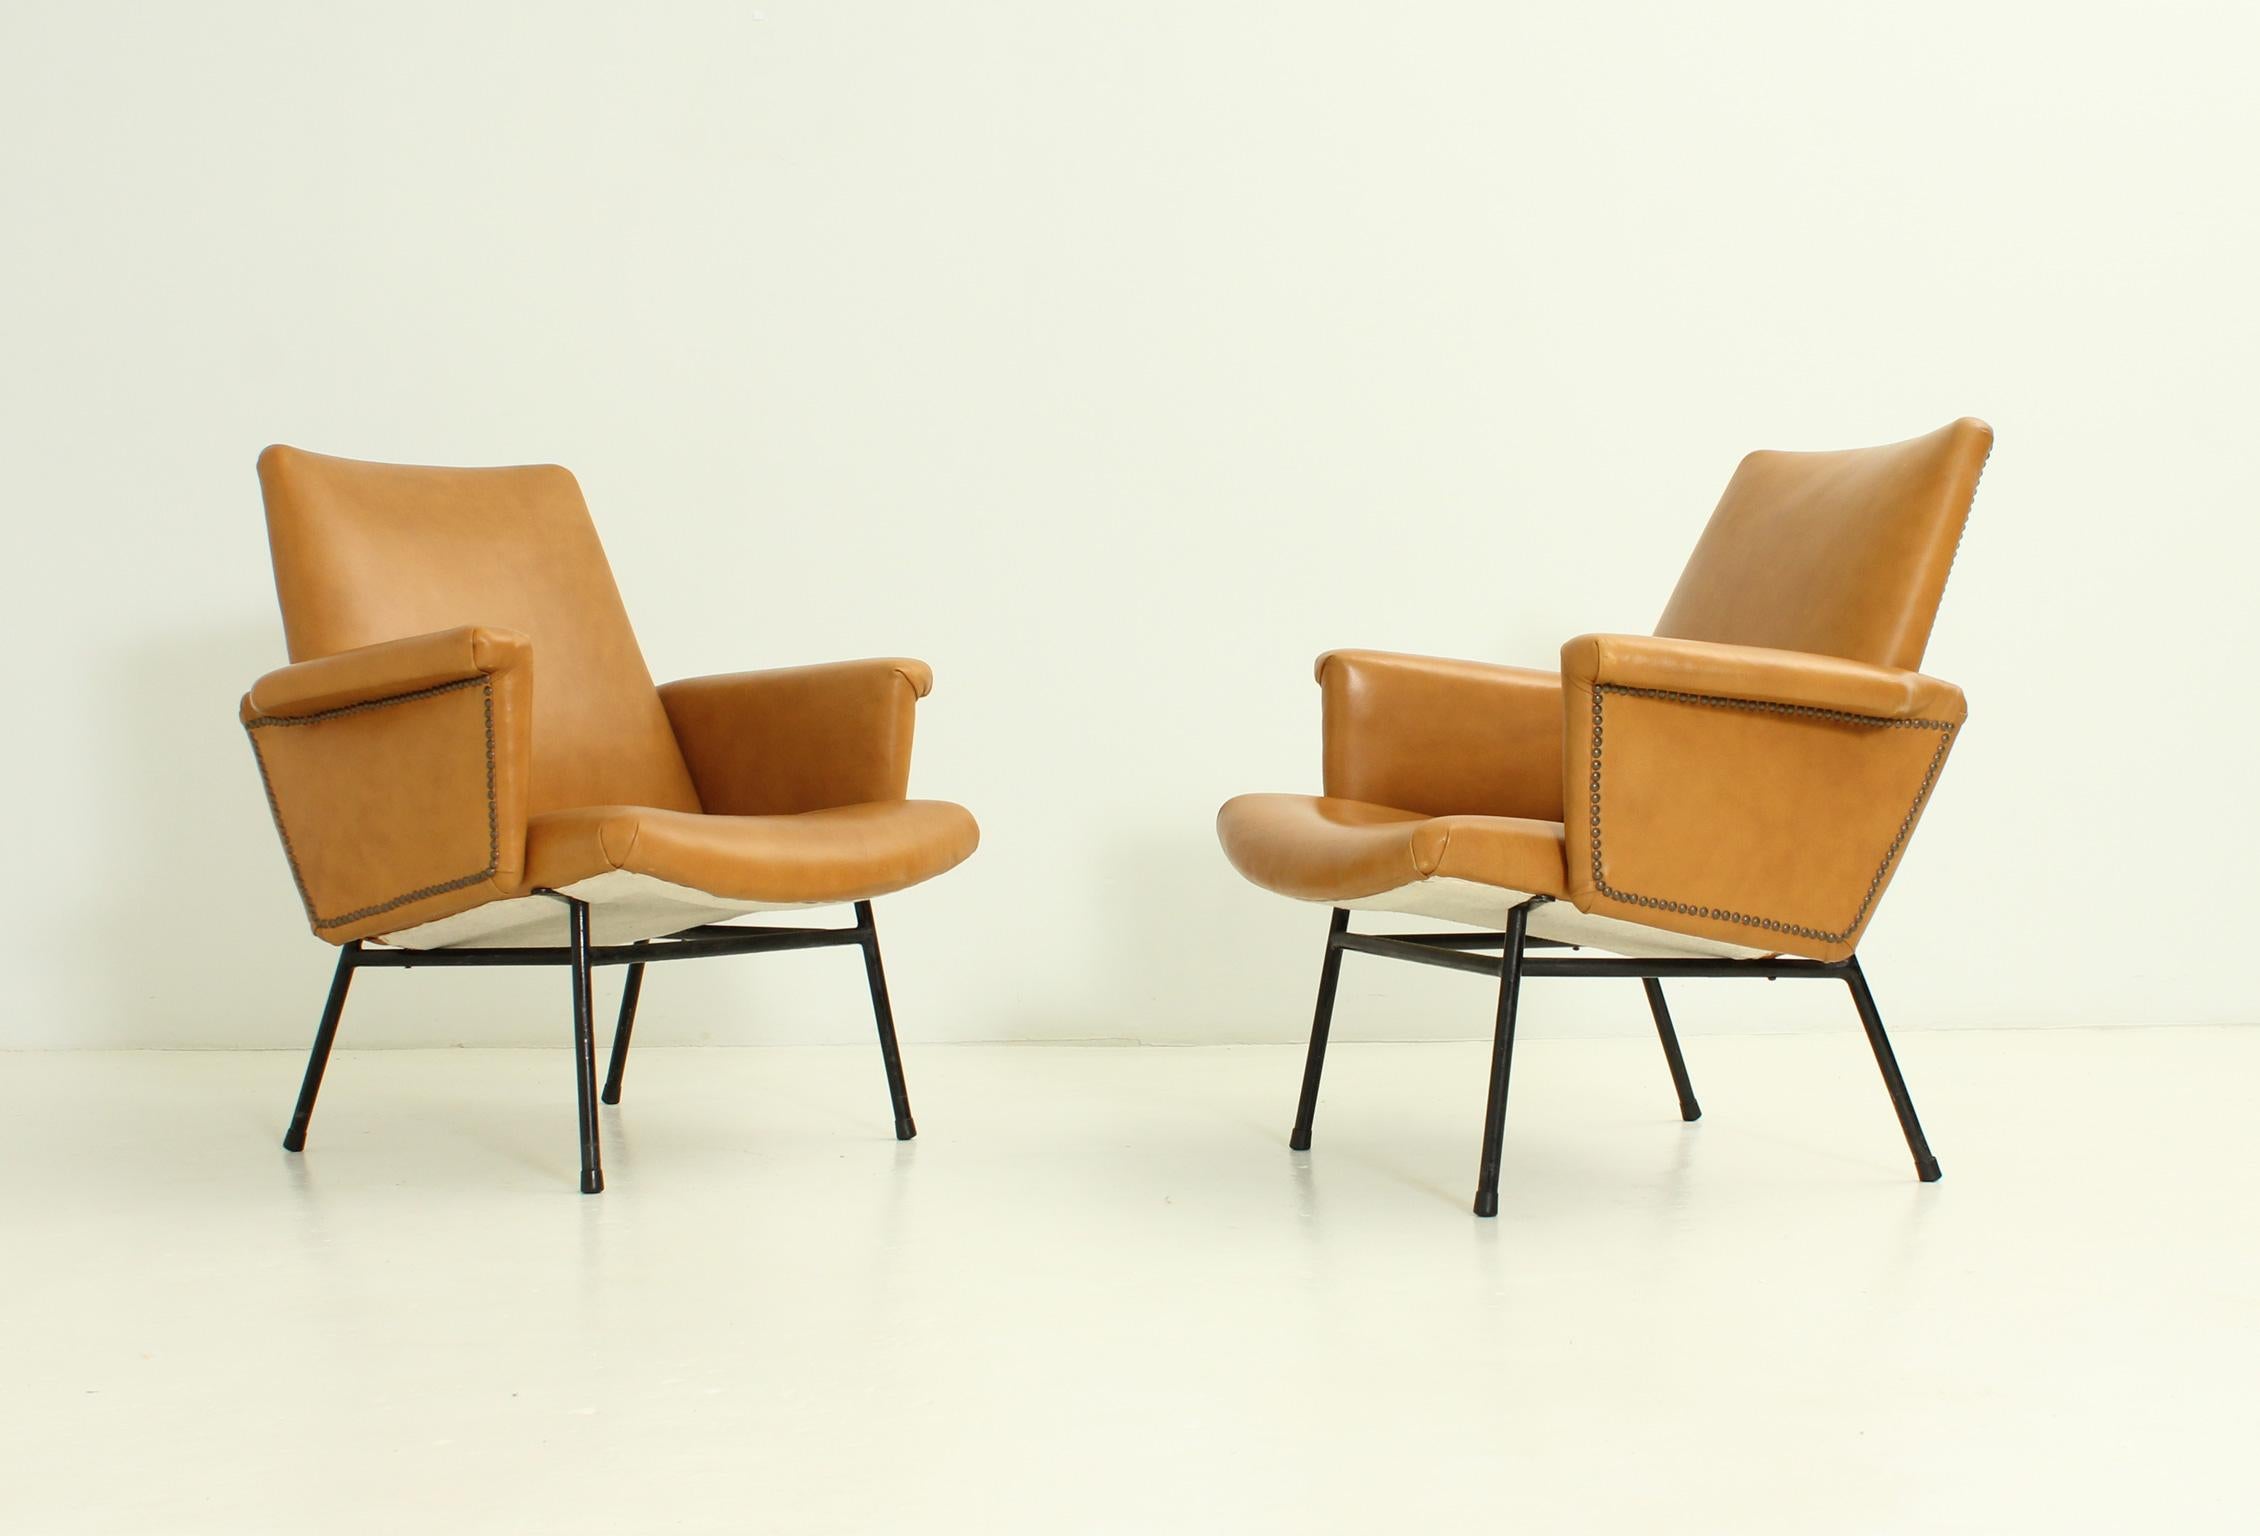 Pair of armchairs model SK 660 designed in 1953 by Pierre Guariche for Steiner, France. Structure in black lacquered metal and upholstered in original tan leather.